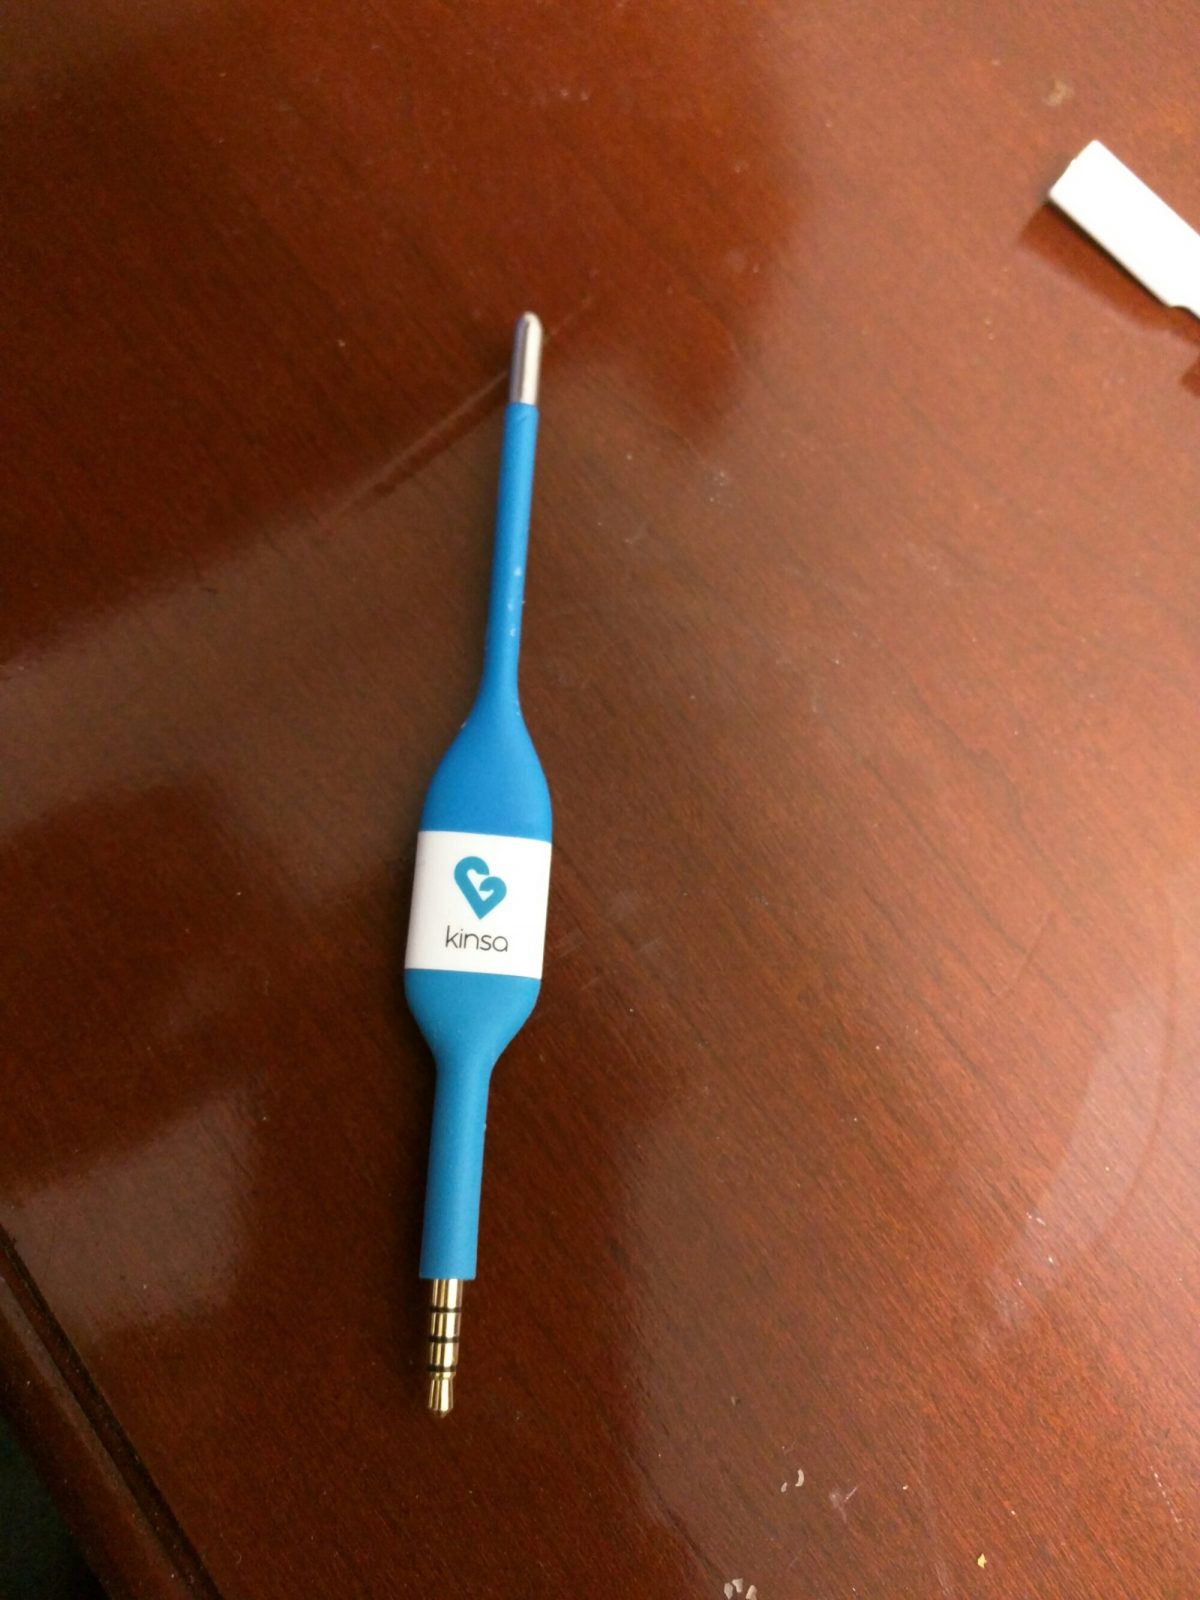 Kinsa Smart Thermometer Review